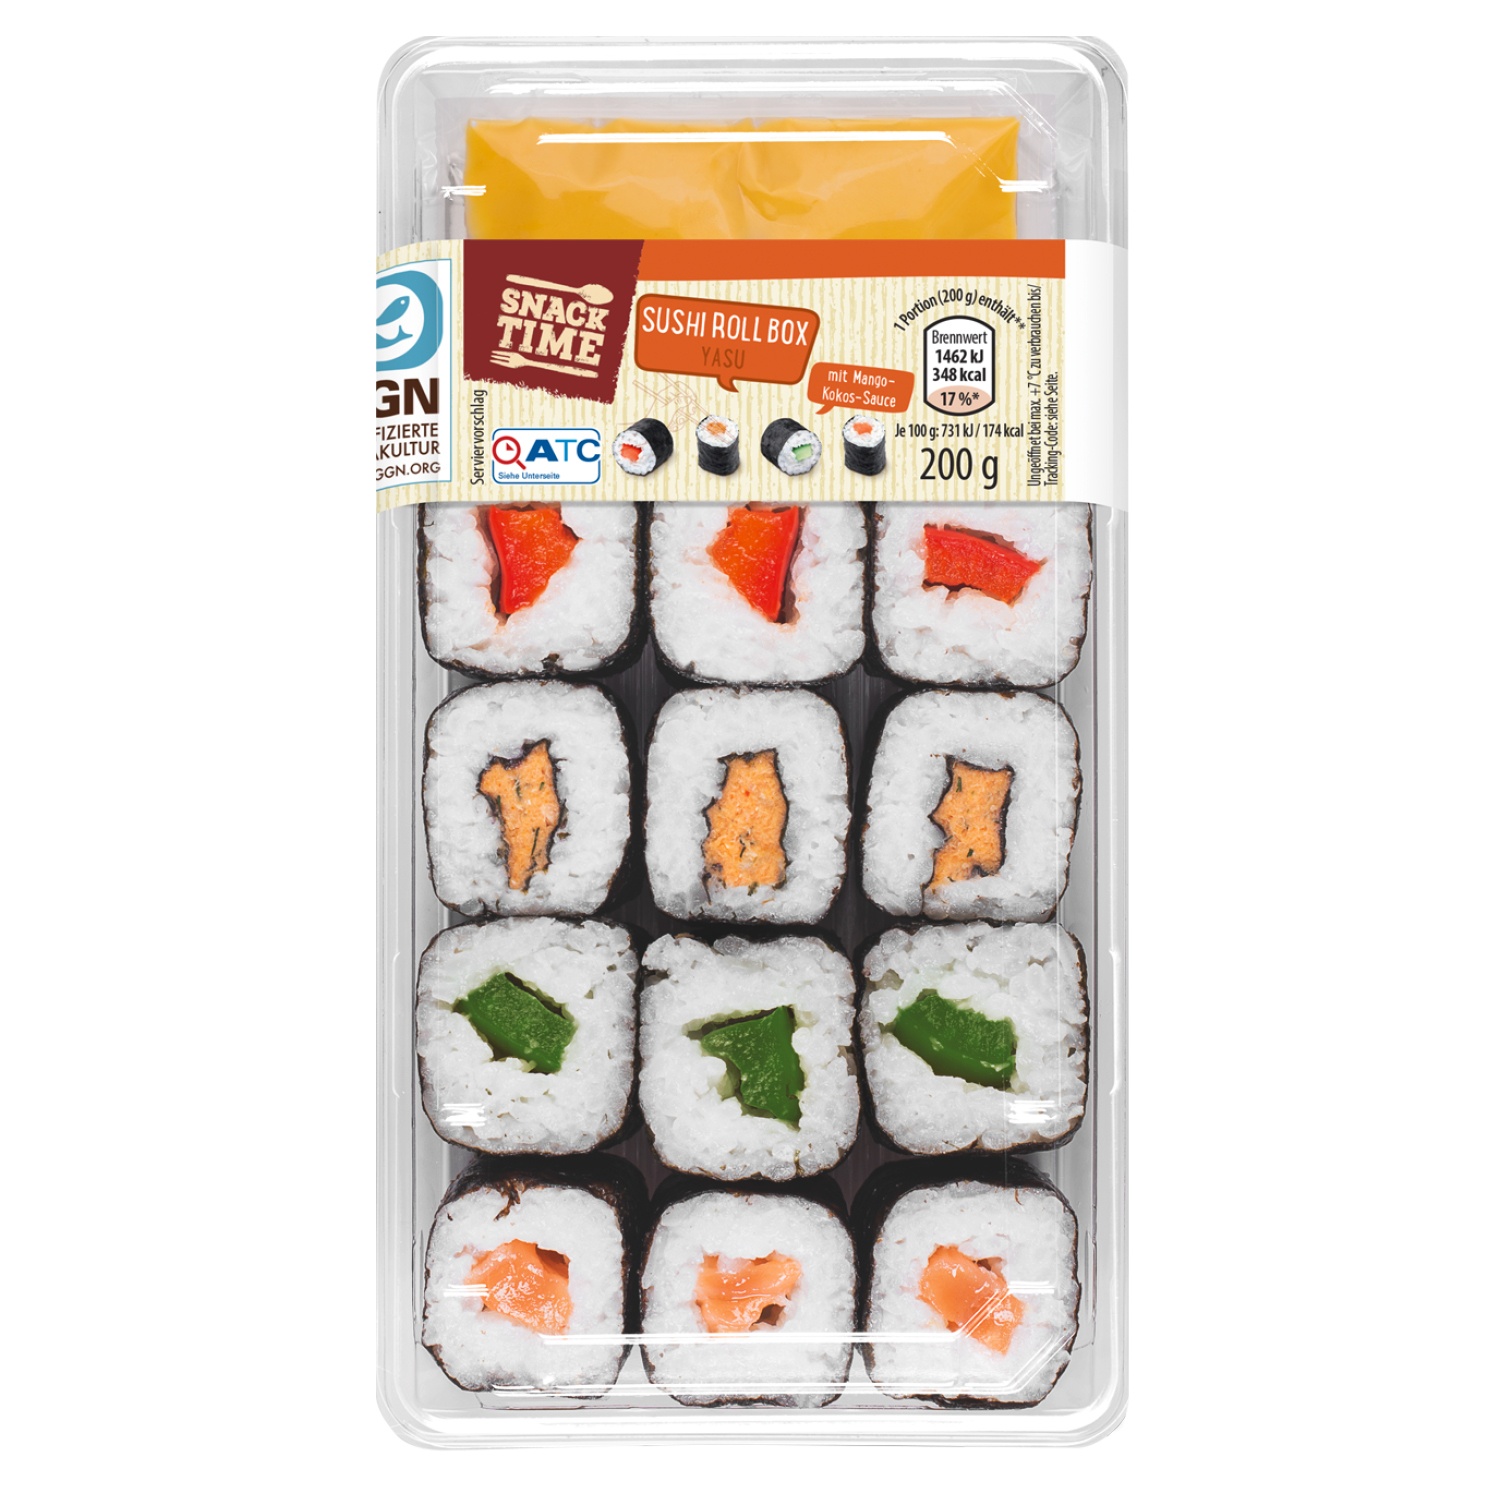 SNACK TIME Sushi Roll Box 200 g